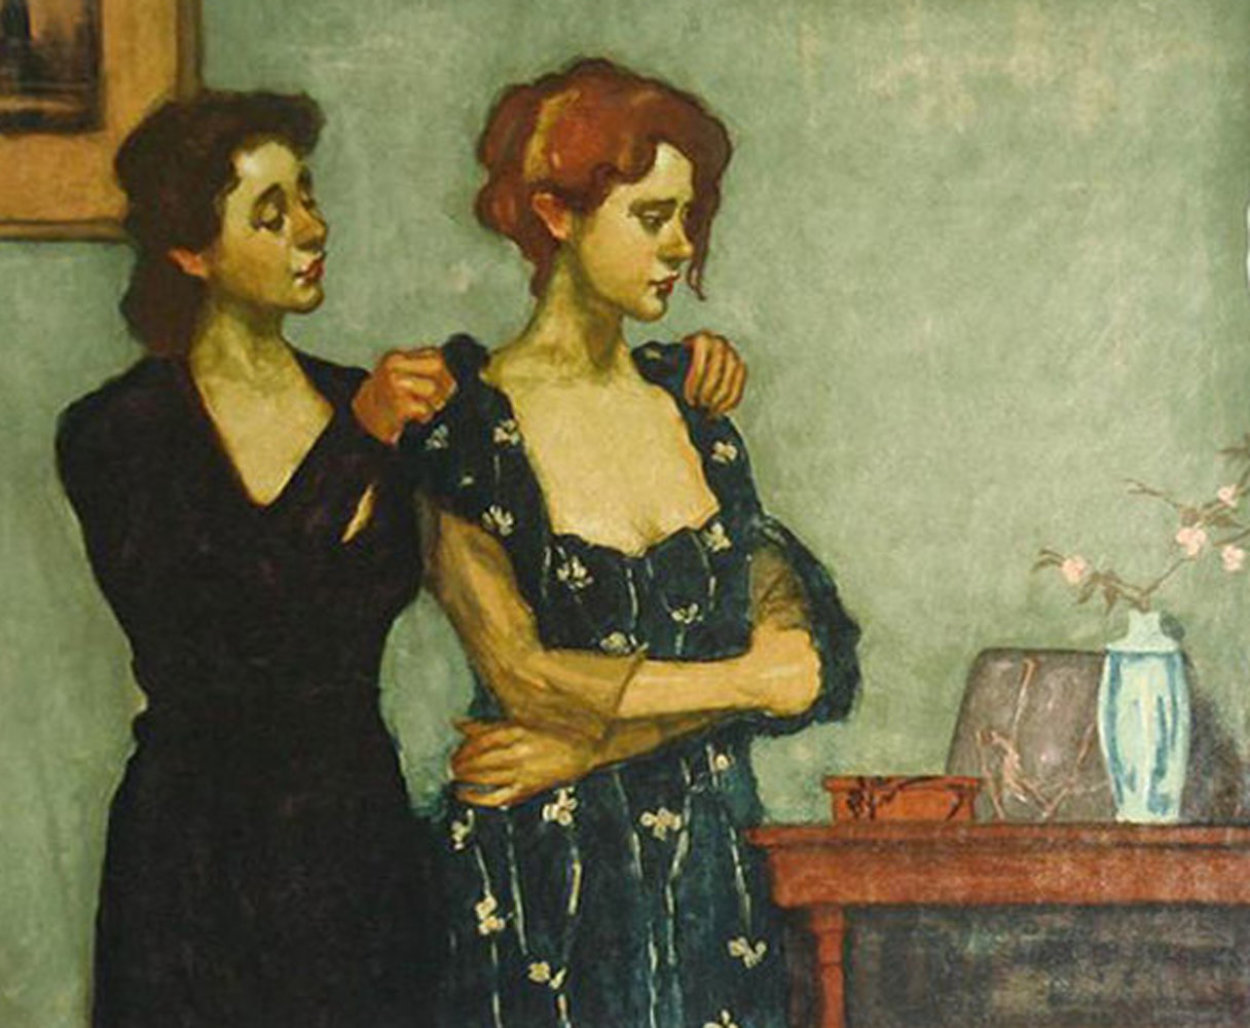 Helping With the Dress Limited Edition Print by Malcolm Liepke